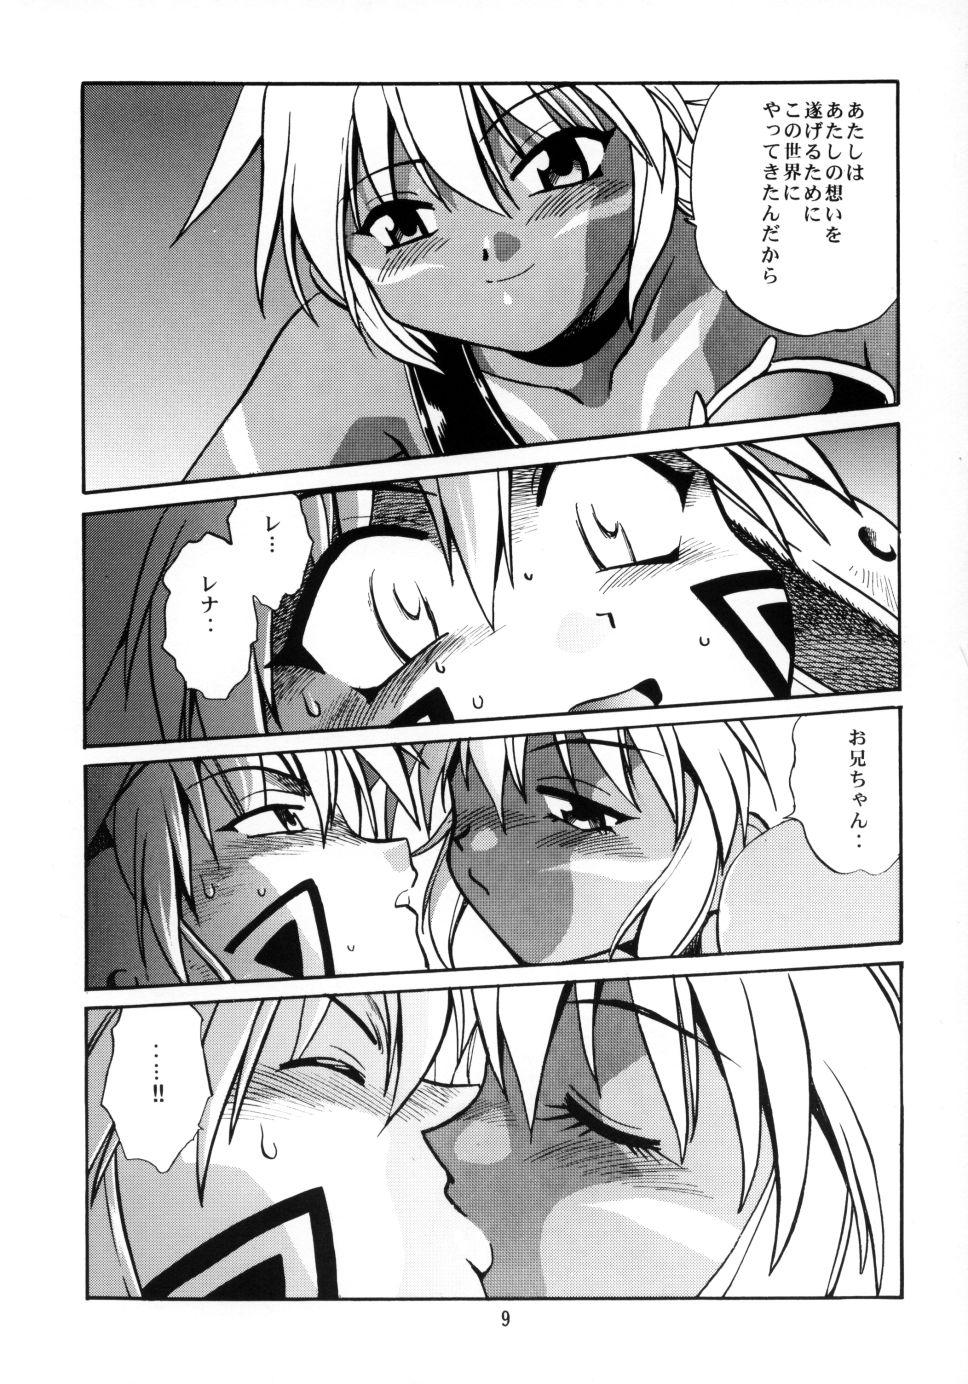 Ex Girlfriends .hack//extra - .hacklegend of the twilight Reverse - Page 8